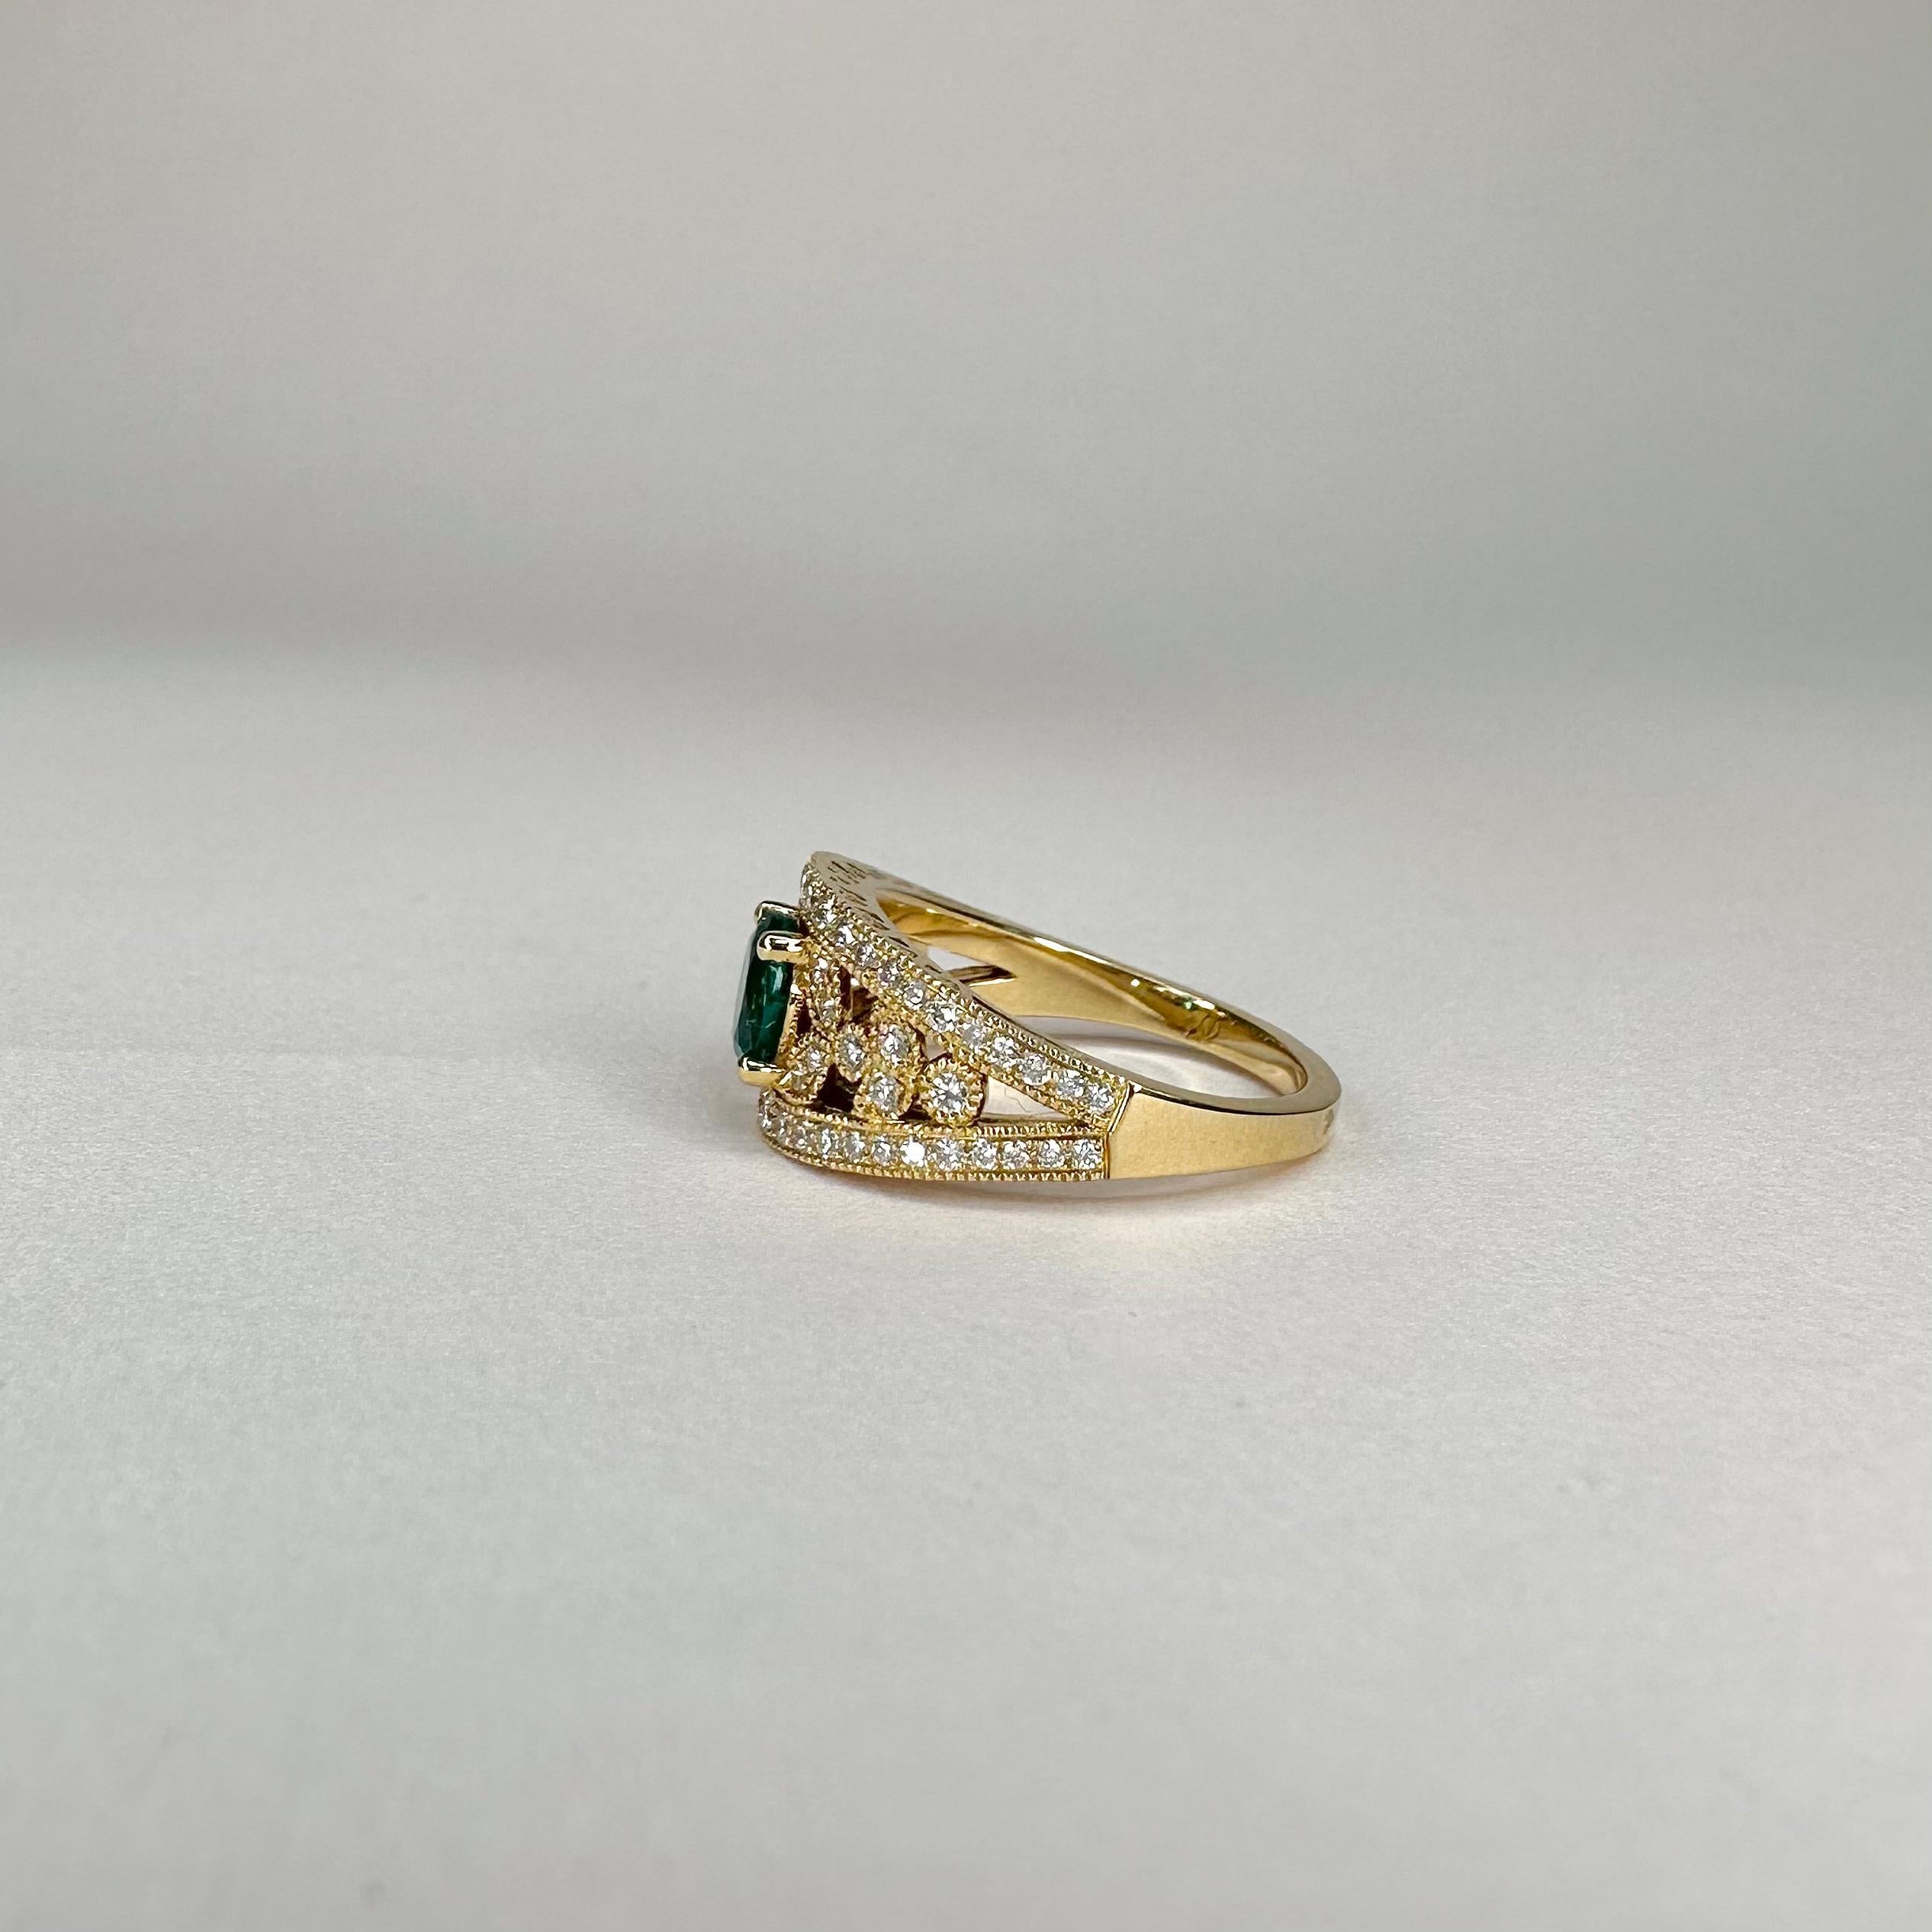 For Sale:  18k Yellow Gold Laurel Leaf Design 0.85 Ct Vivid Green Emerald Ring with Diamond 6